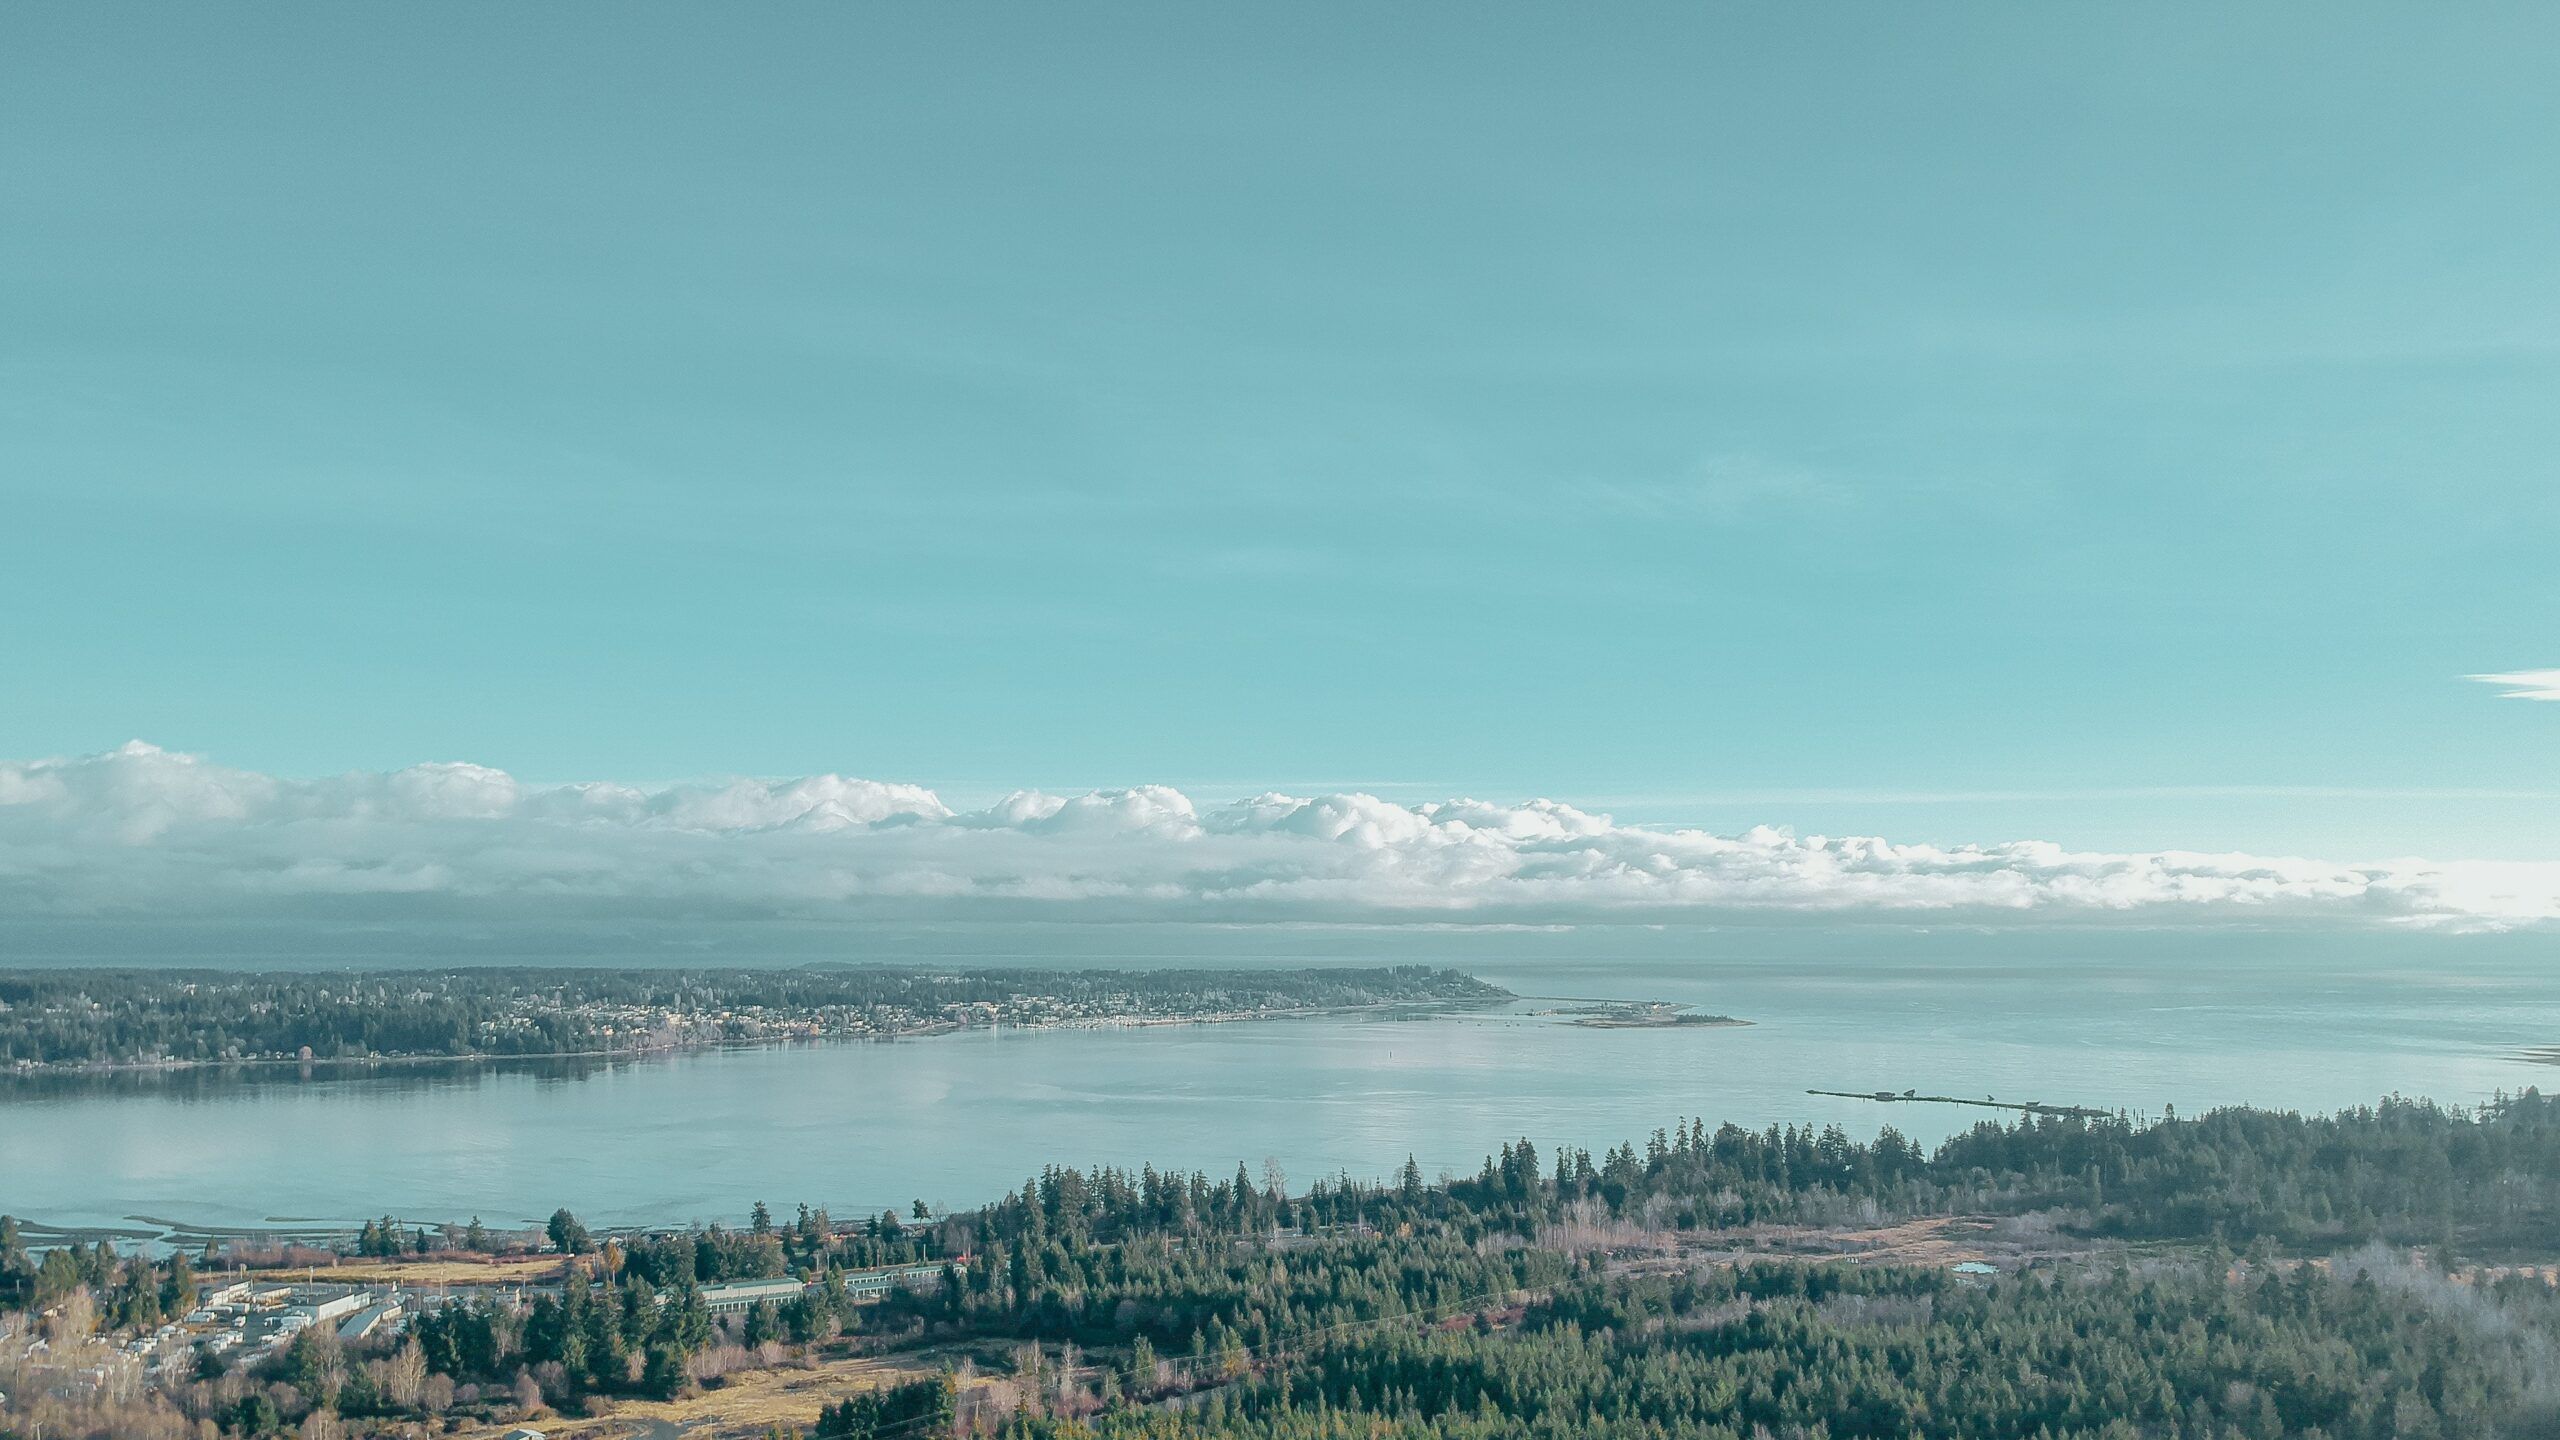 Elevated photograph of Courtenay showing the city and its inlet coast